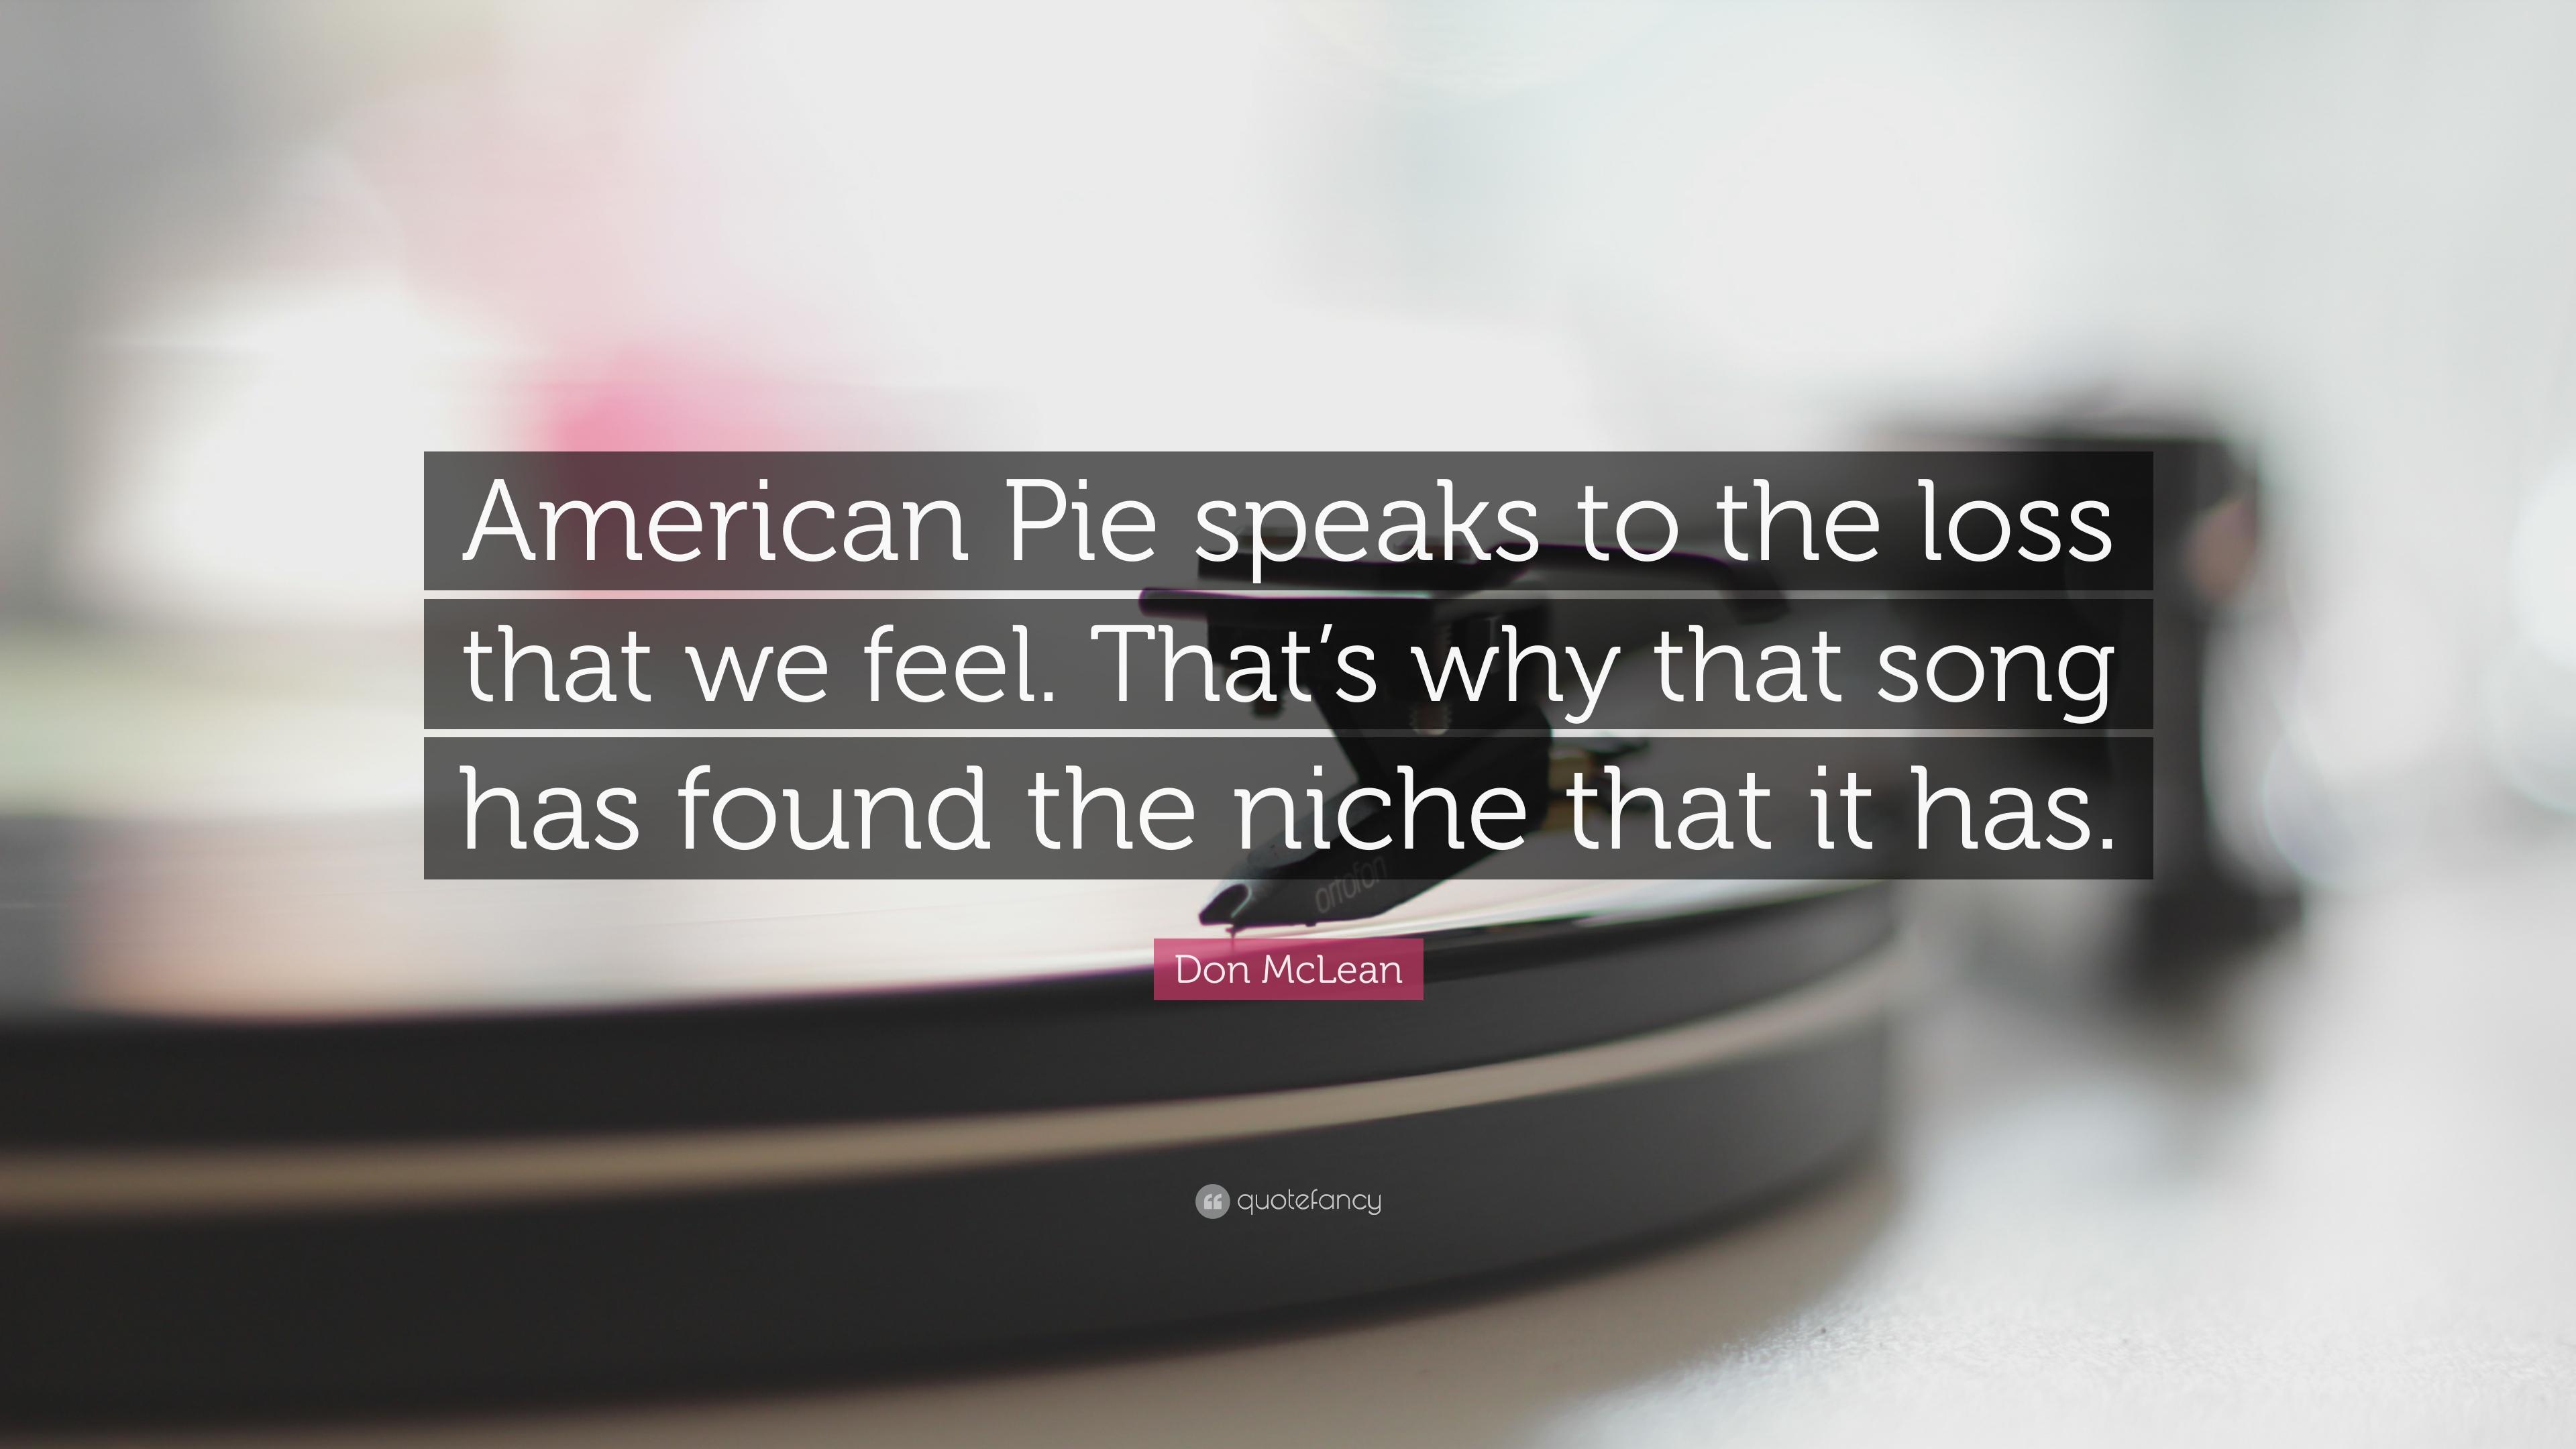 Don McLean Quote: “American Pie speaks to the loss that we